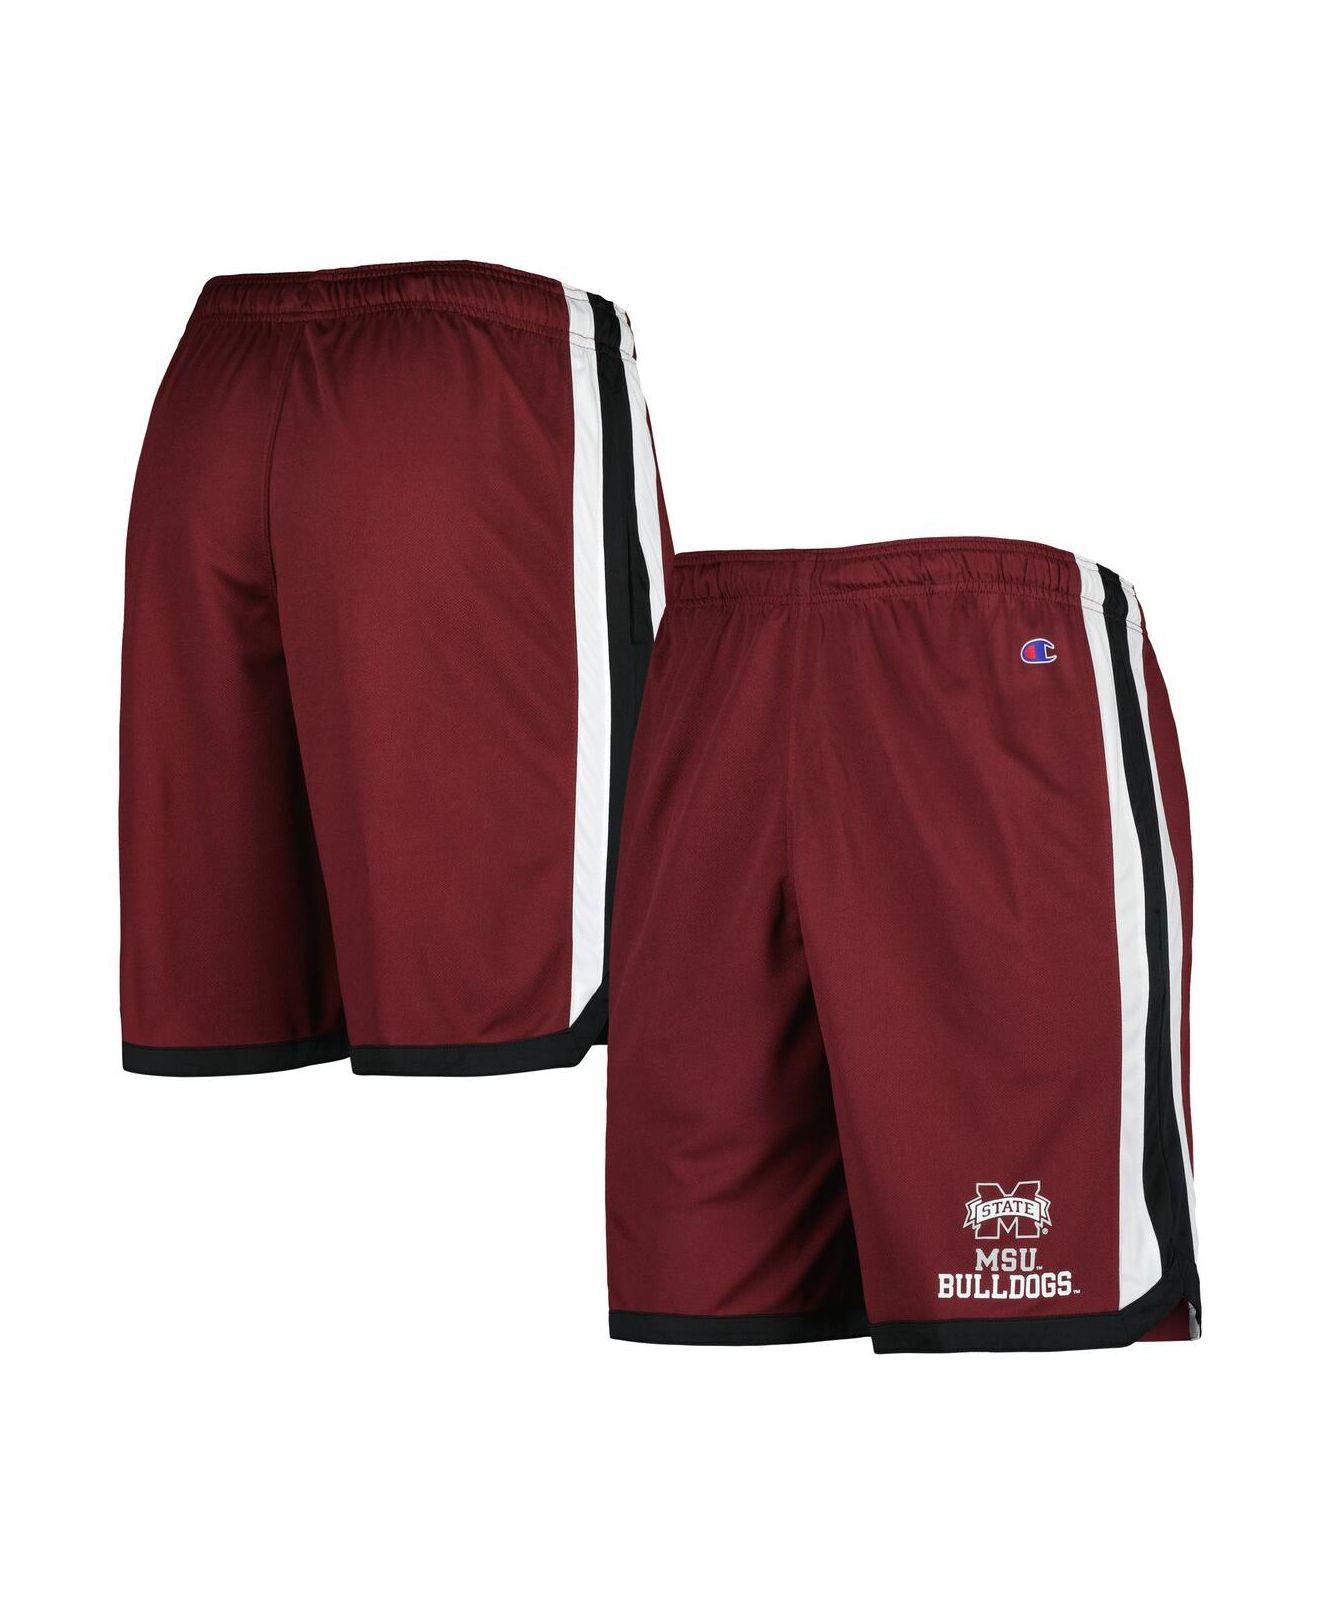 Champion Mesh Football Practice Jersey, Maroon, Youth L / XL Free Shipping!